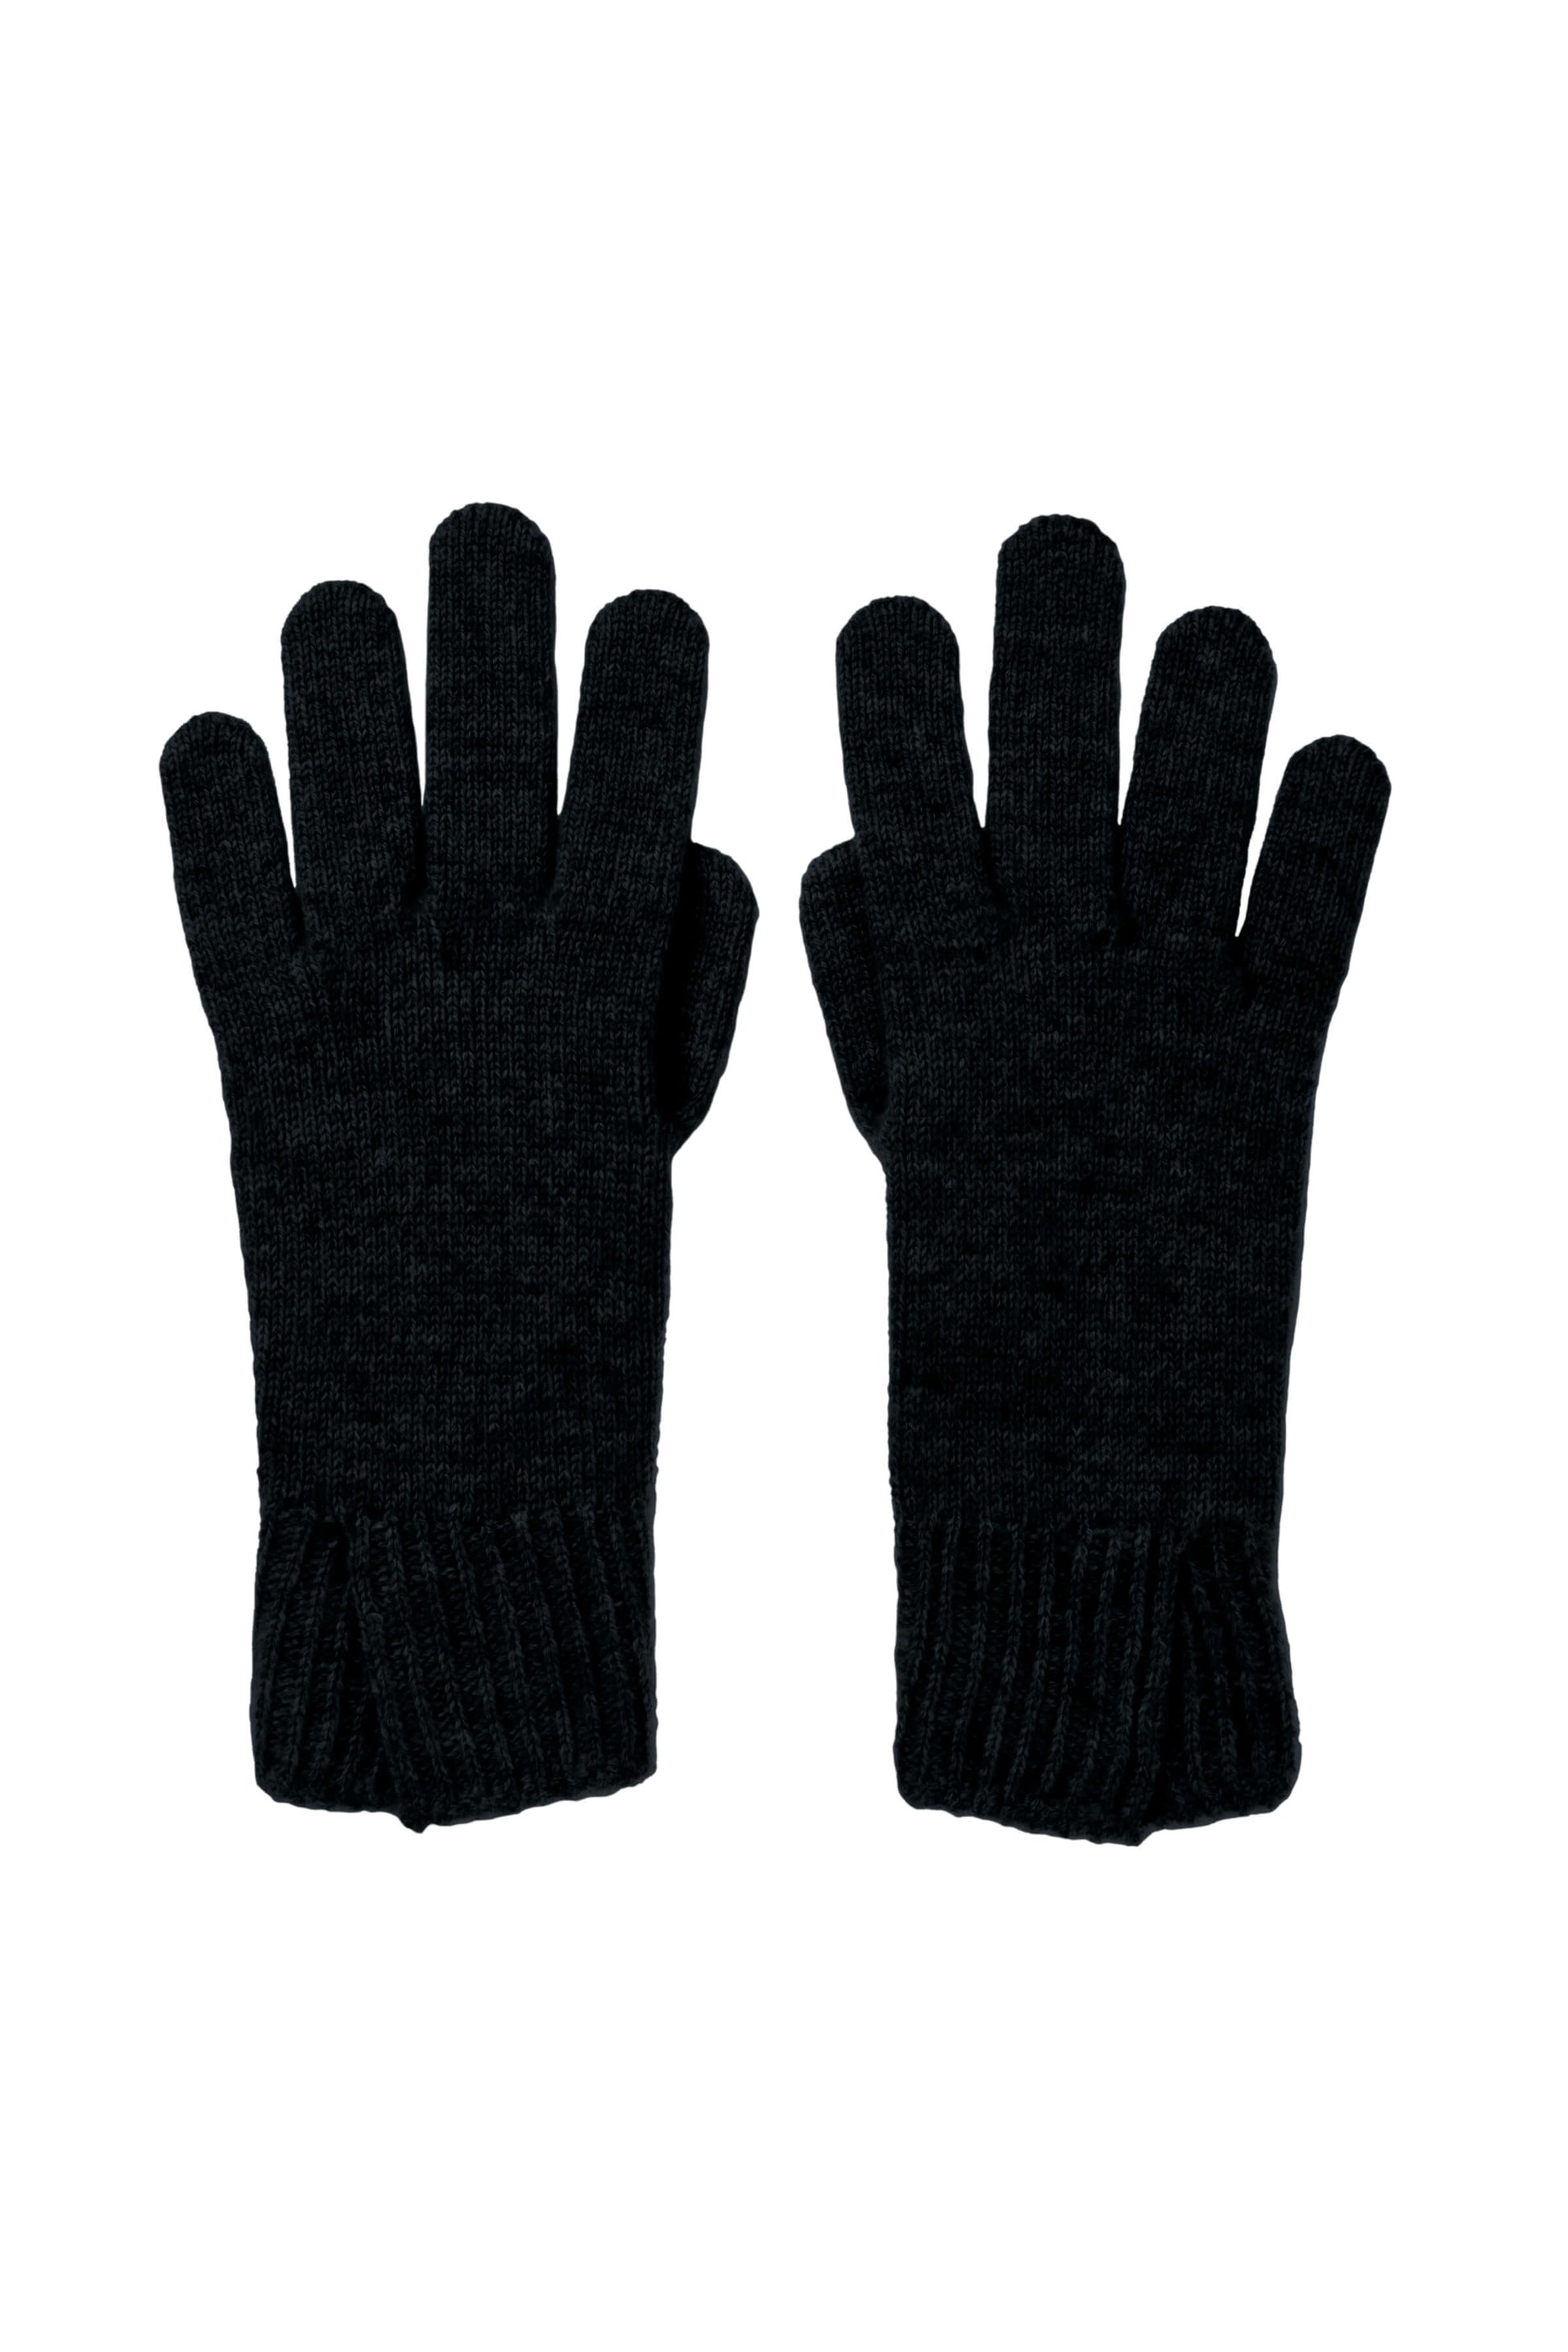 Johnstons of Elgin AW24 Knitted Accessory Black Split Cuff Cashmere Gloves HAE03228SA0900ONE